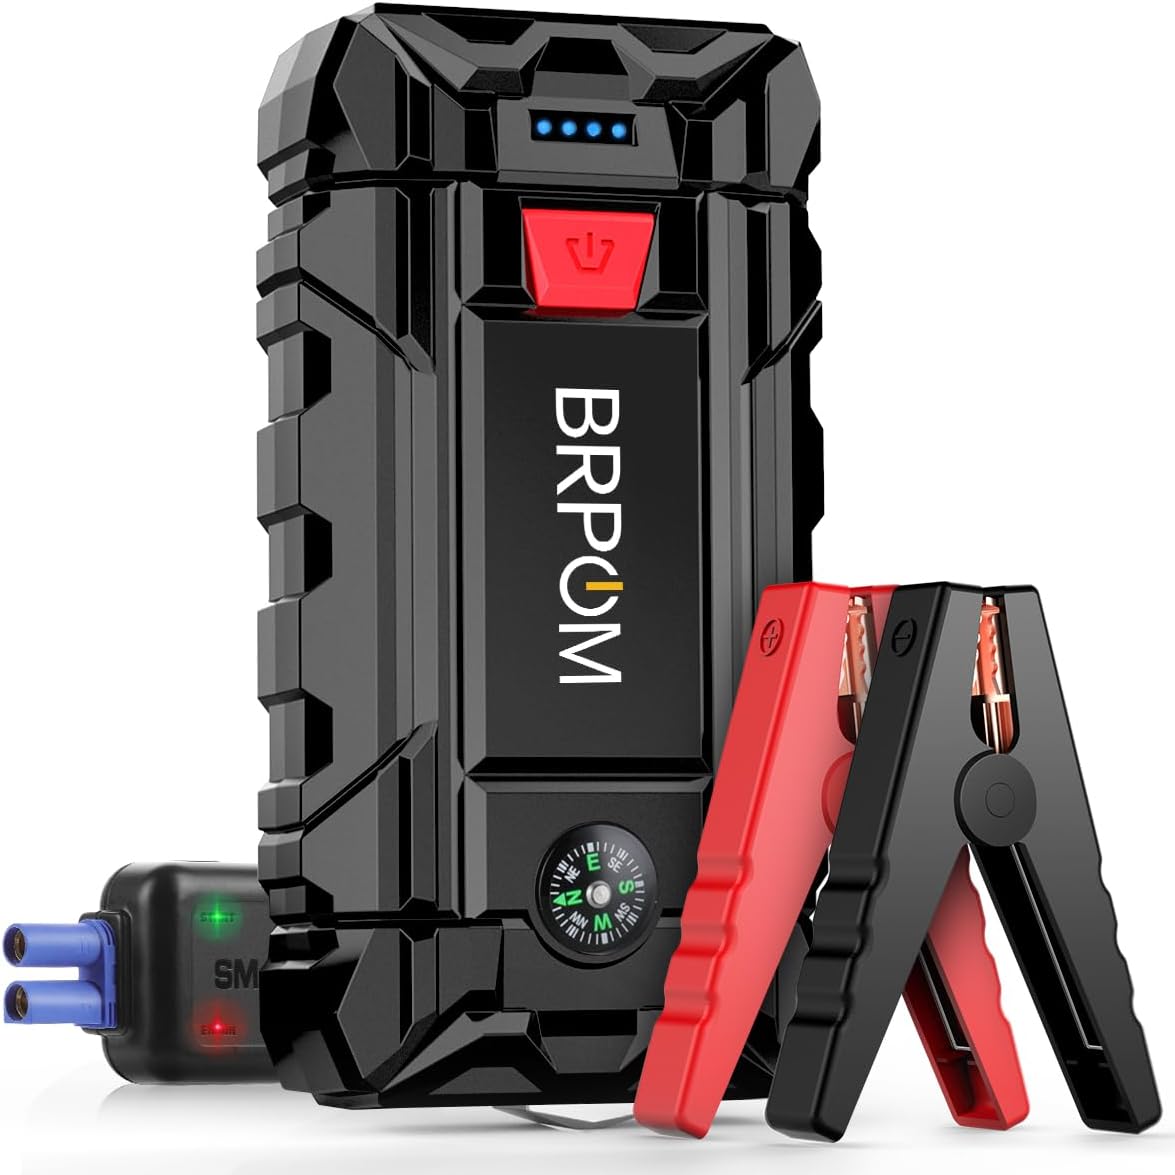 Gillaway 016 Jump Starter 3000A Peak, Jump Starter Battery Pack up to 50  Jump Starts, 12V Jump Box for Car Battery, up to 9.0L Gas and 7.0L Diesel